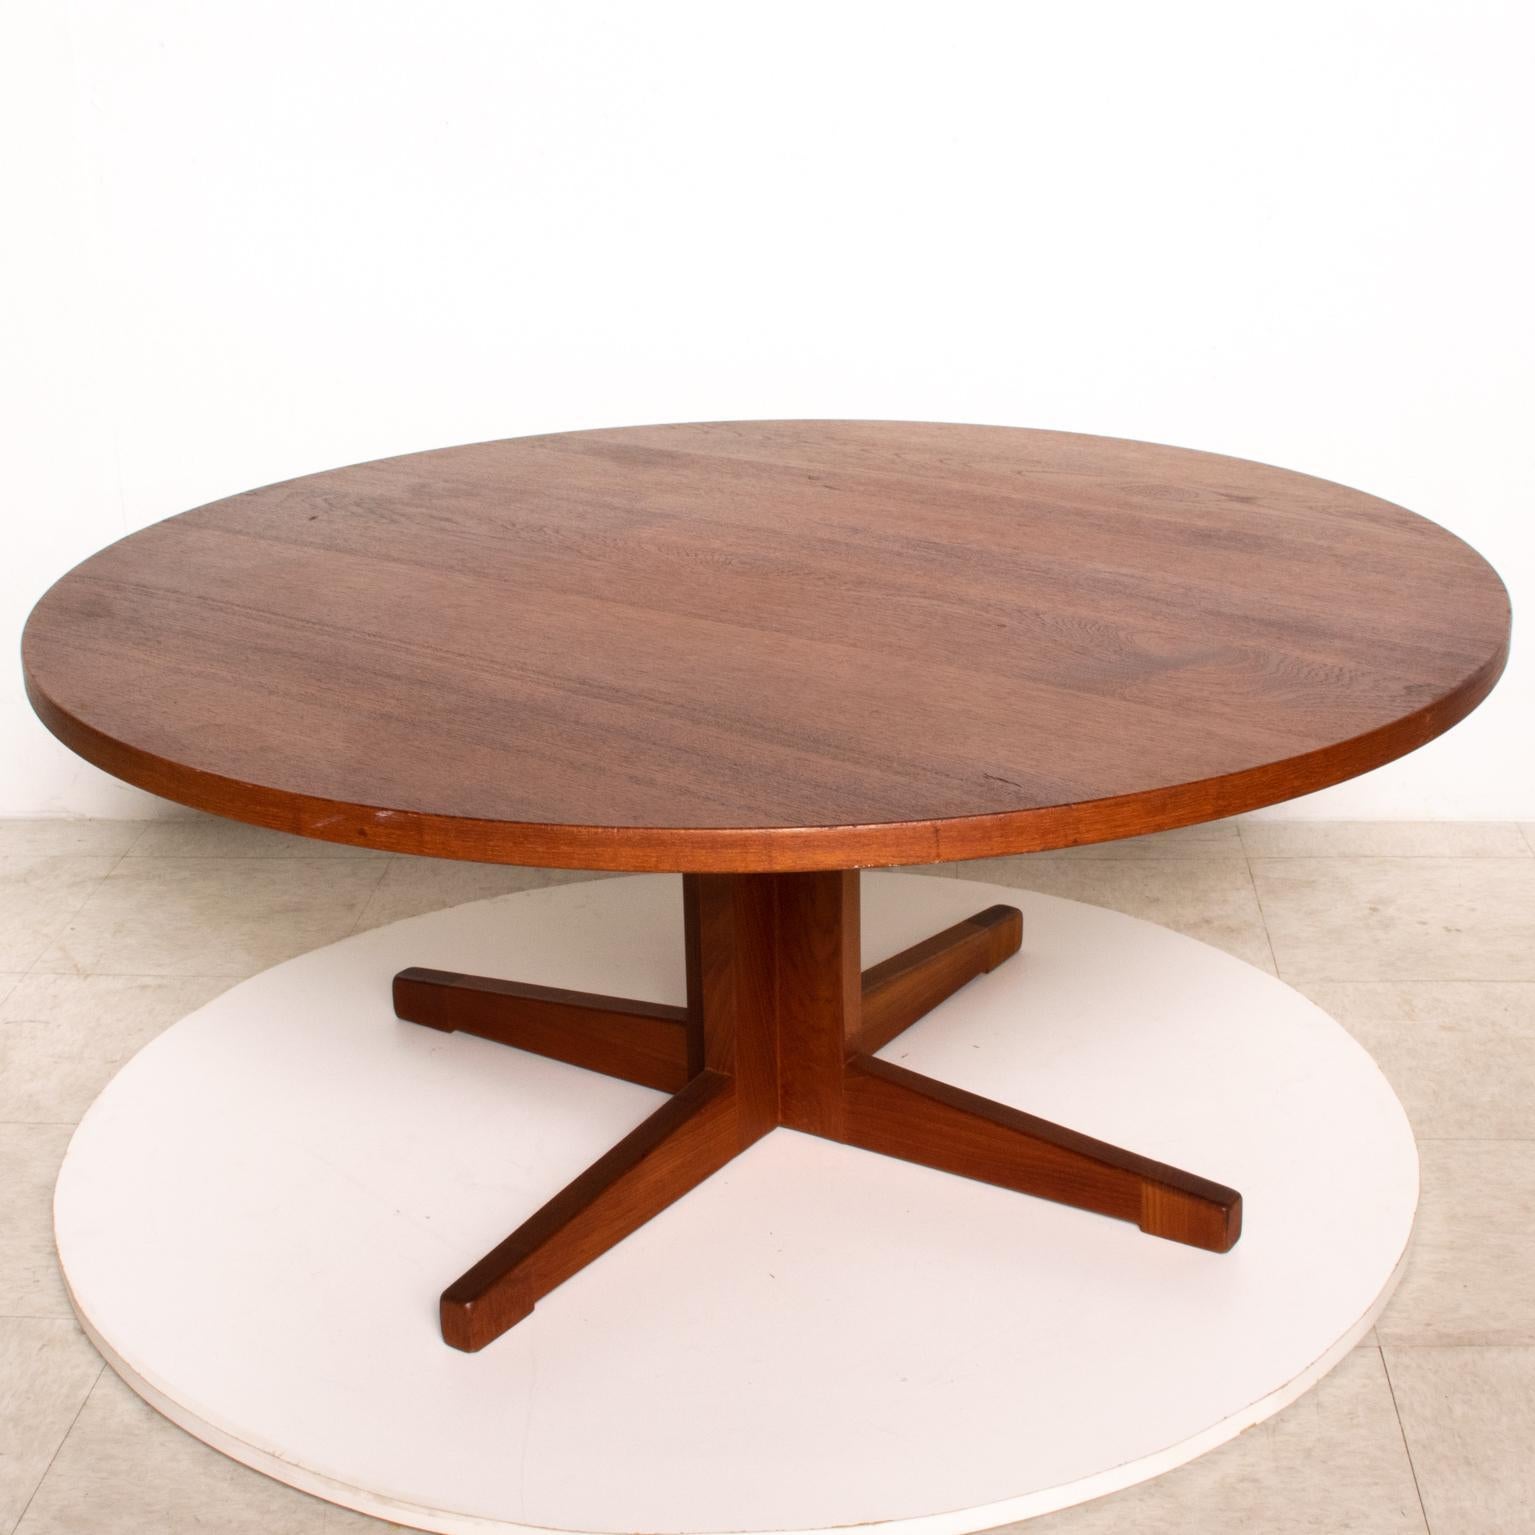 For your consideration, a round coffee table constructed with solid teak wood. Made in Denmark, circa 1970s. No label present from the maker. Other Danish modern listed from the same Estate. See my other postings. Dimensions: 43 1/2